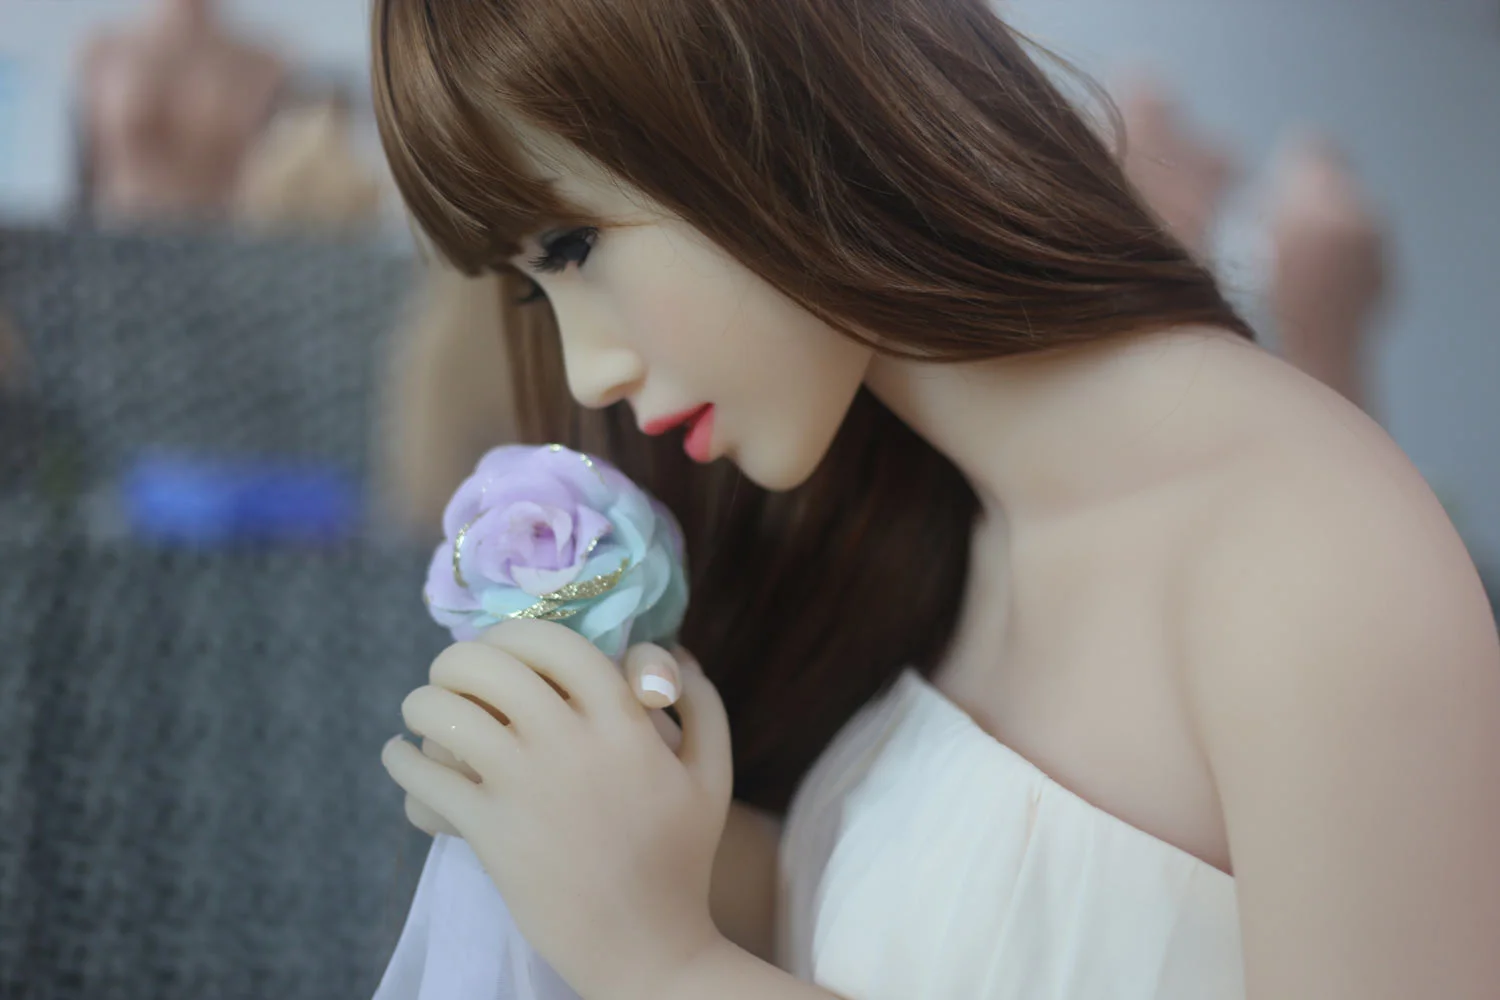 Sex doll with nose sniffing flowers